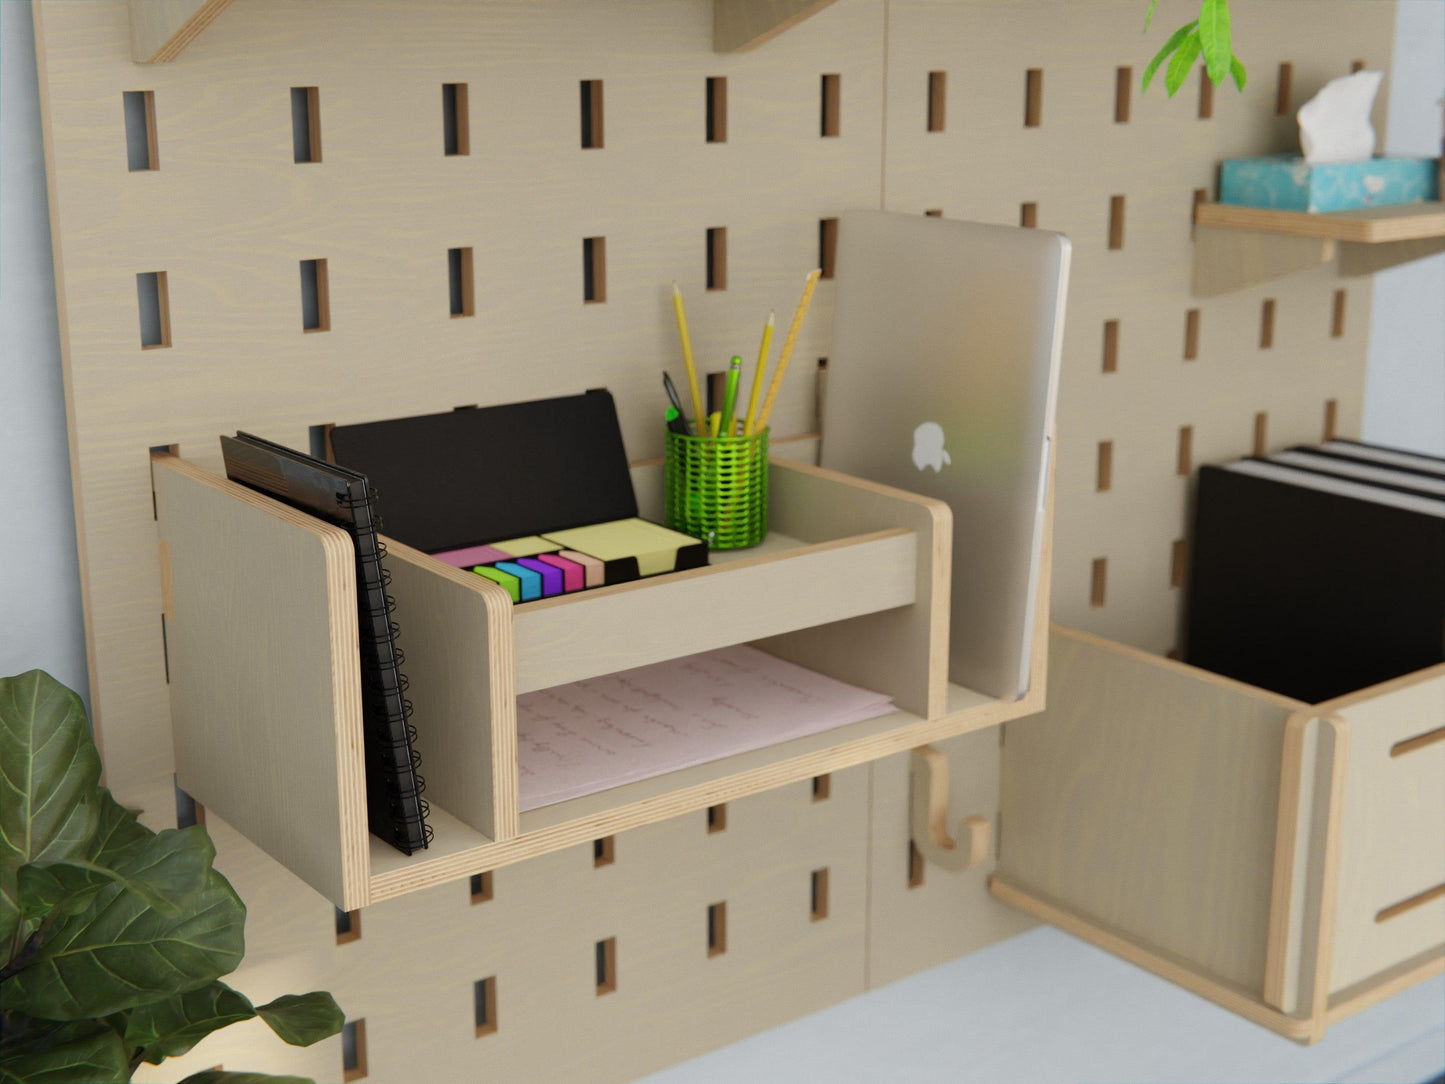 Transform your work zone with our plywood pegboard. The foldable desk and shelves offer unmatched versatility!